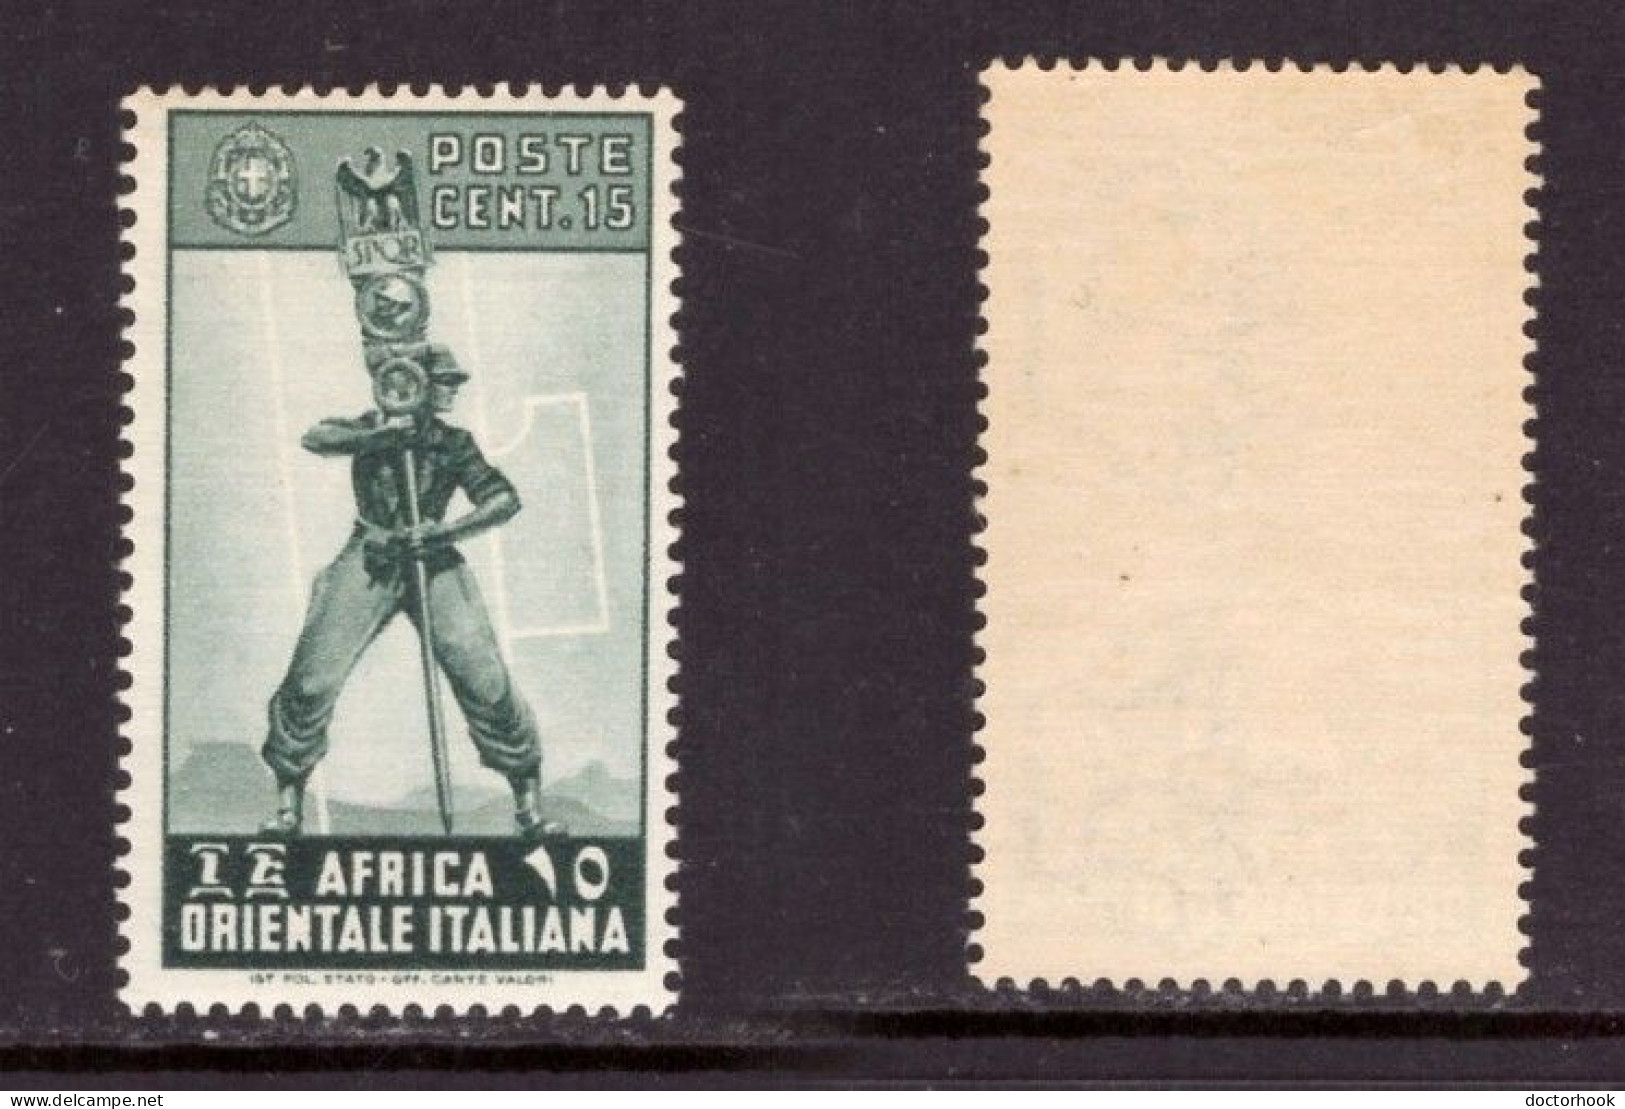 ITALIAN EAST AFRICA   Scott # 5* MINT LH (CONDITION AS PER SCAN) (Stamp Scan # 956-12) - Africa Orientale